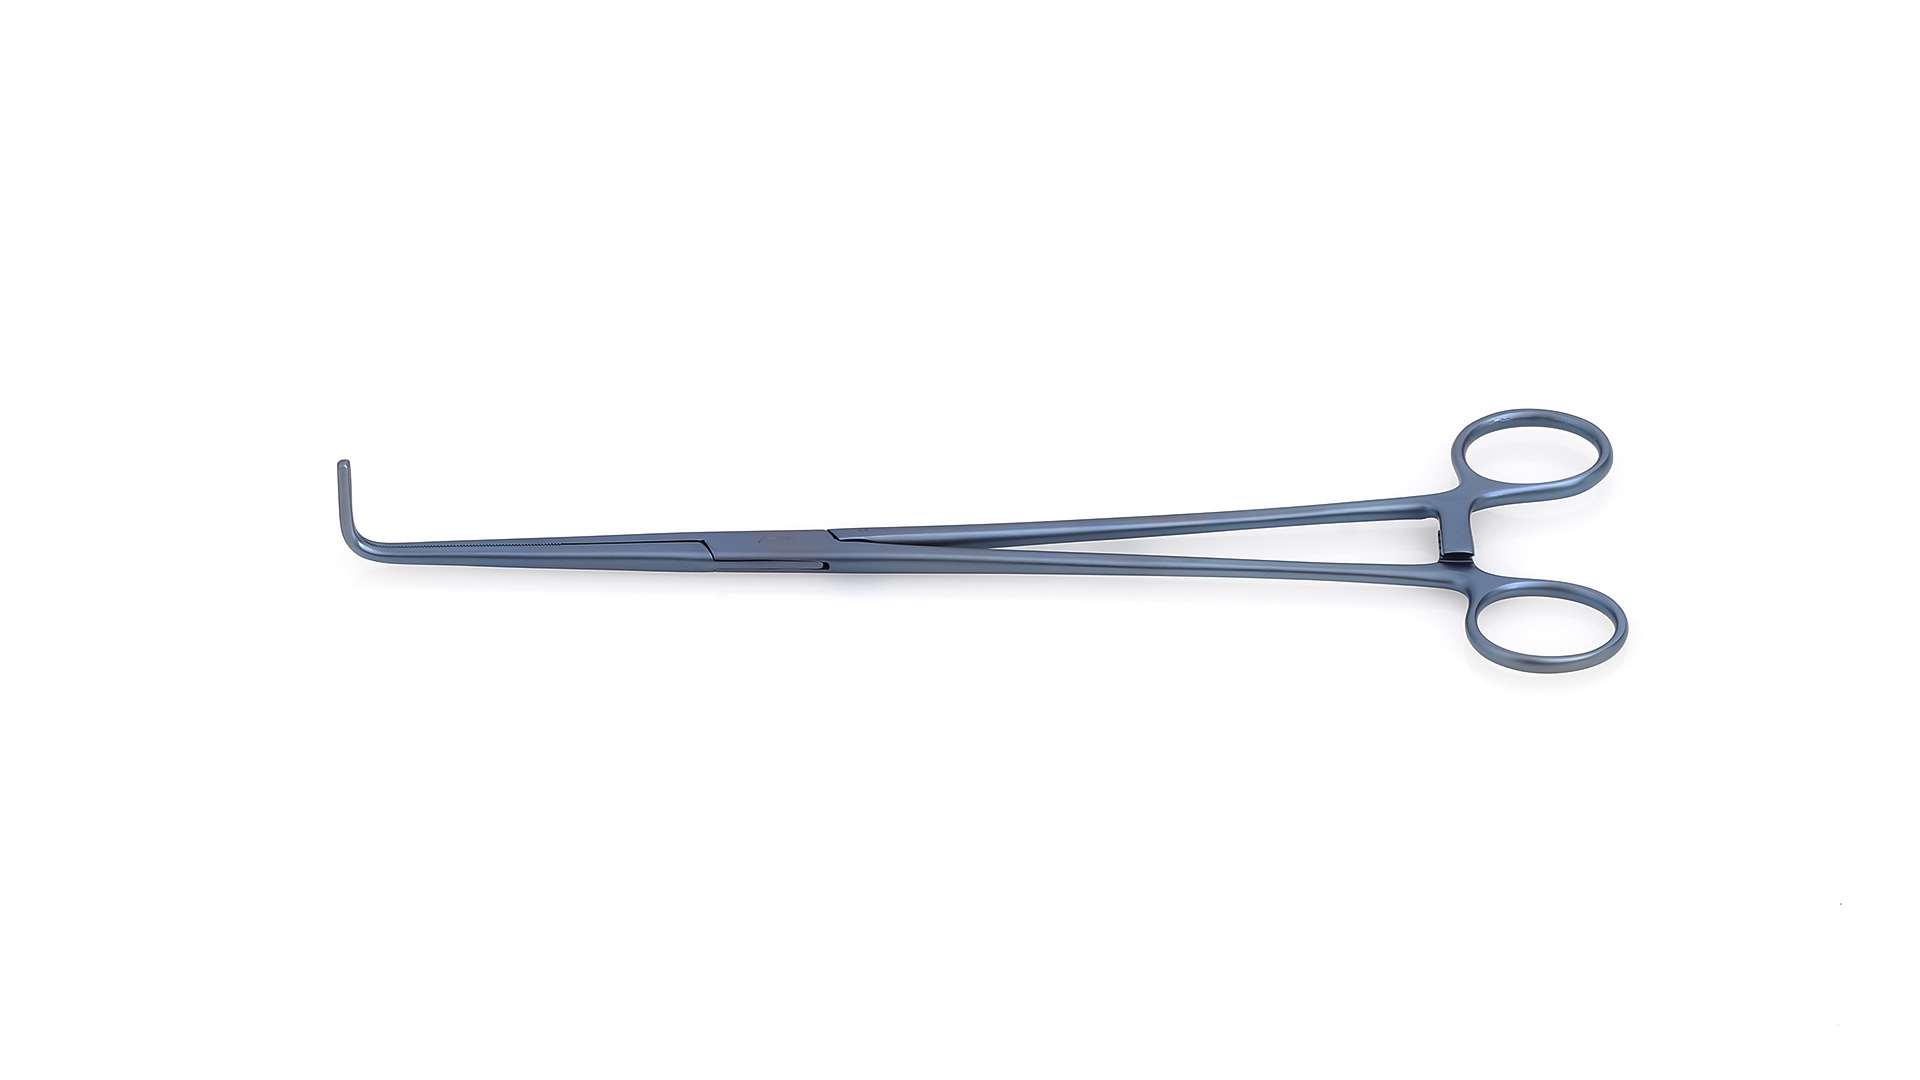 O'Shaughnessy Forceps - Curved serrated jaws